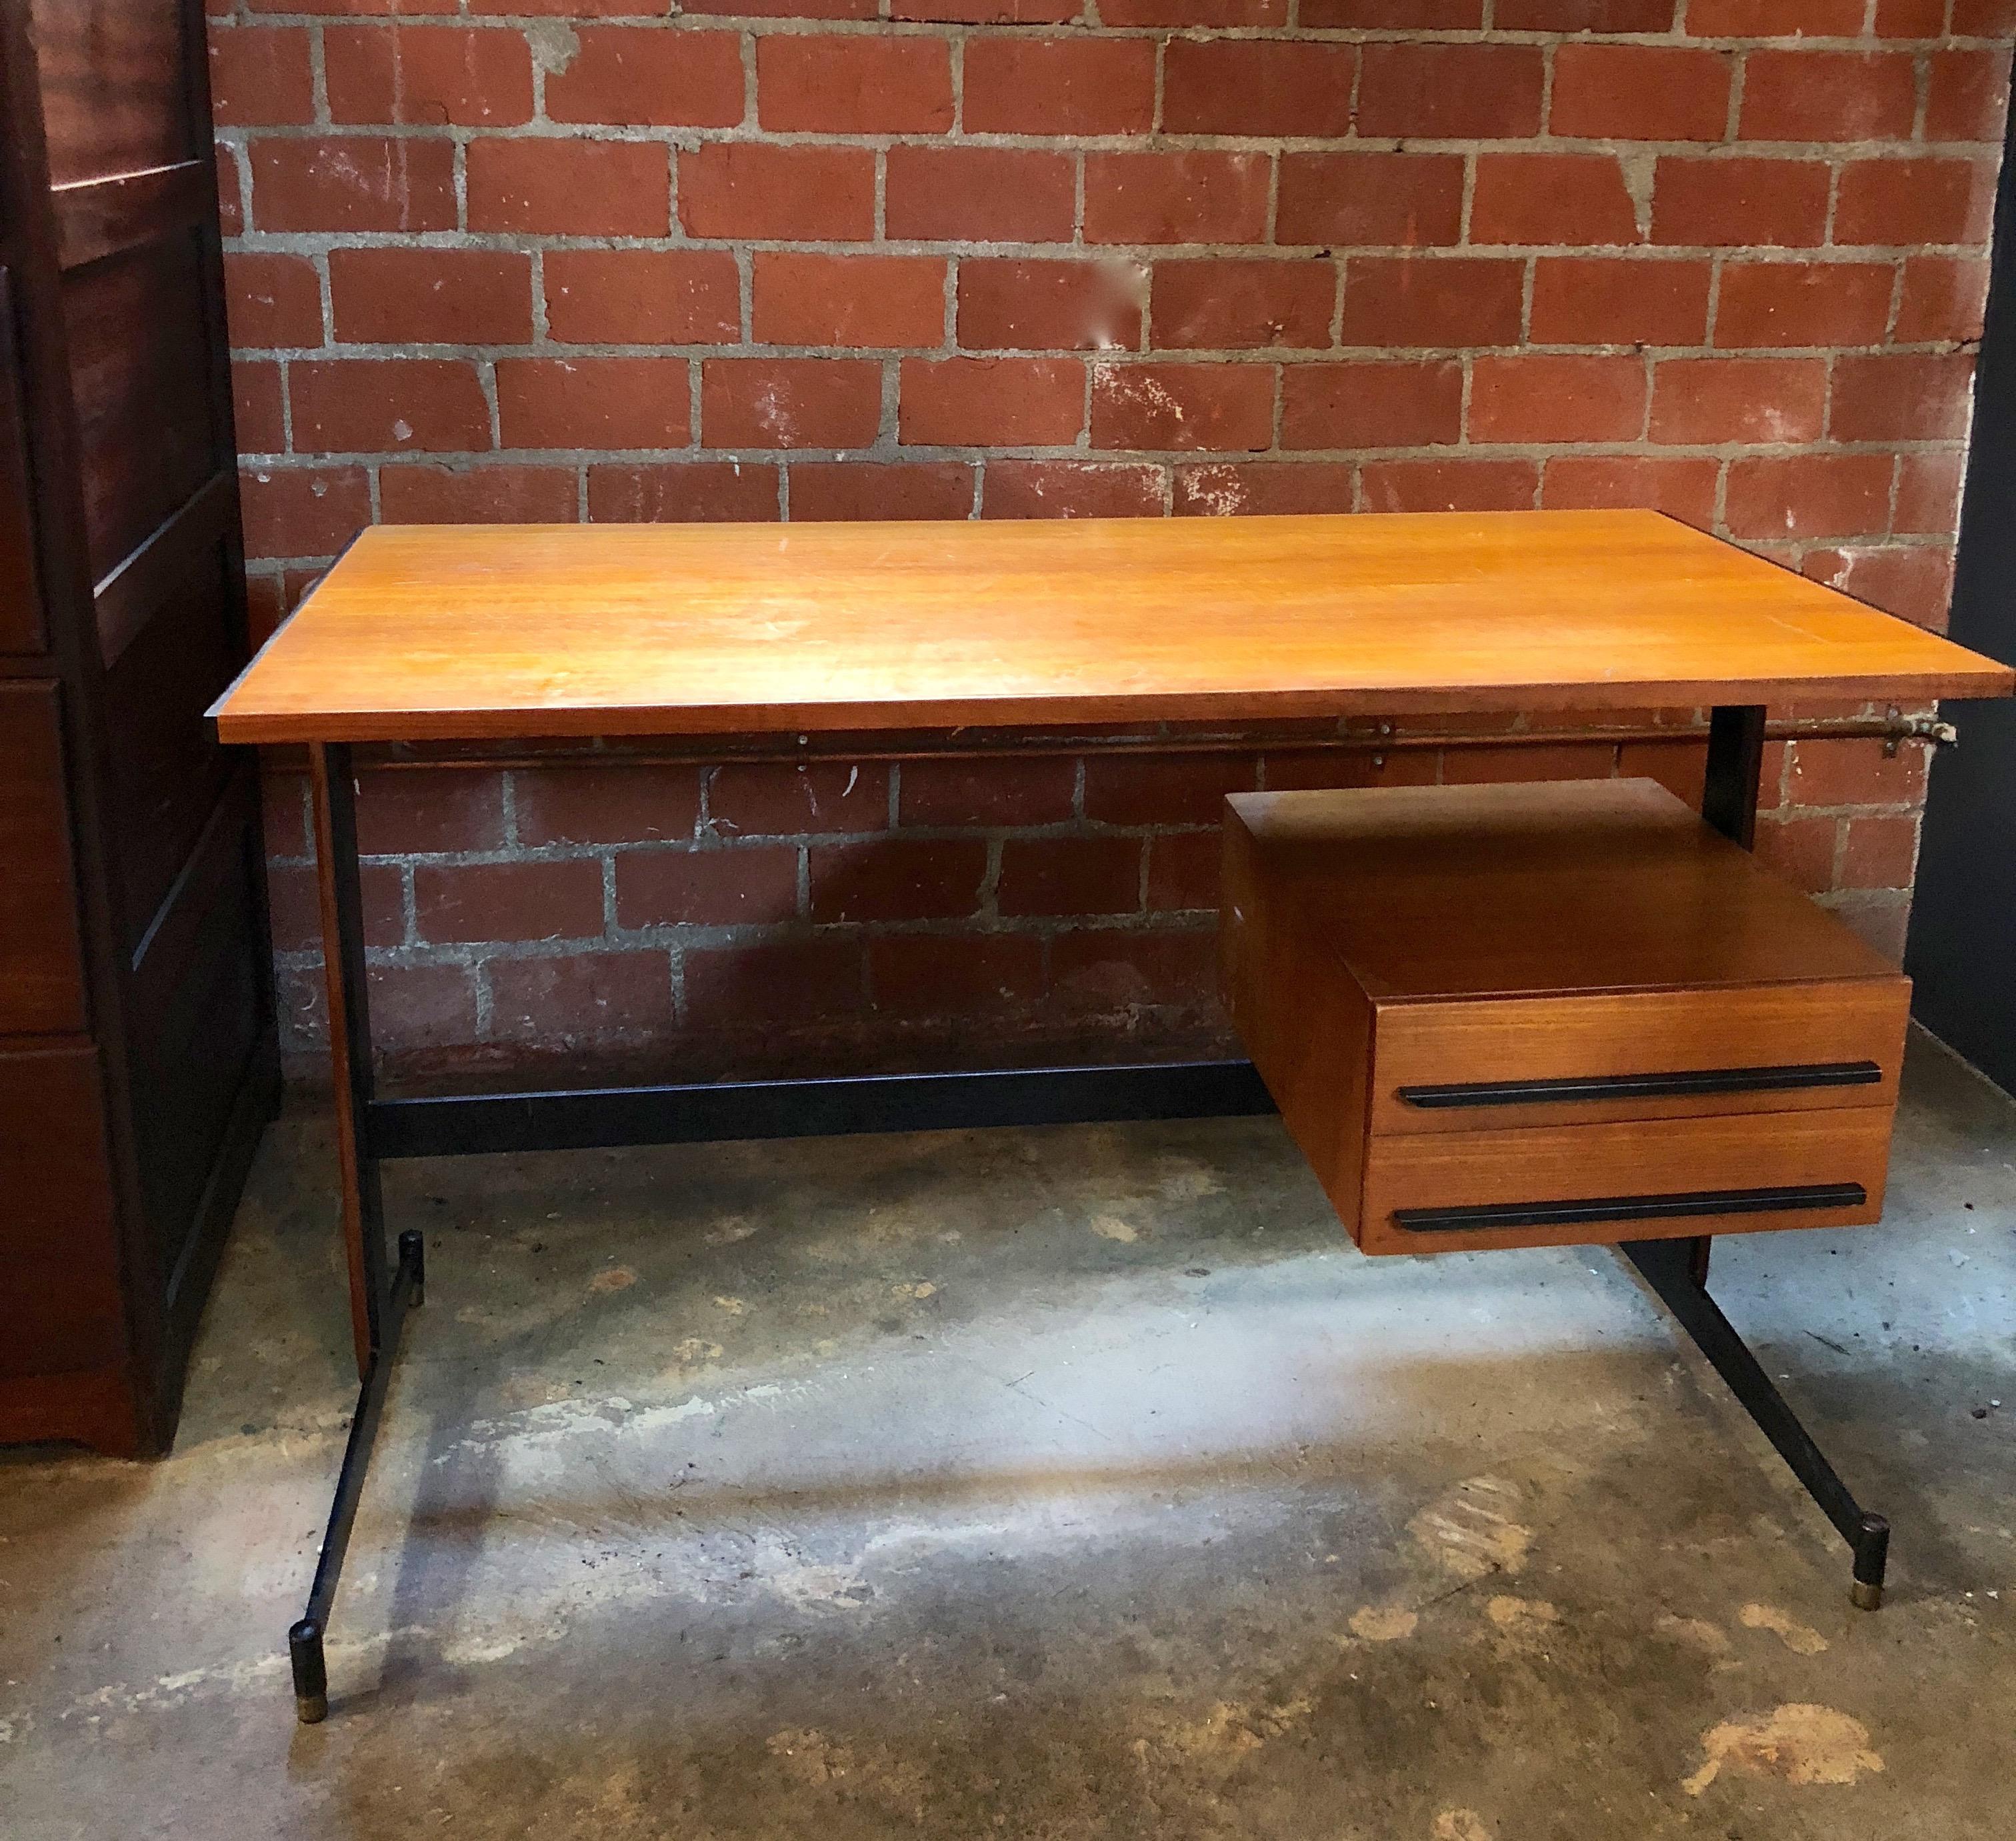 Midcentury Italian teak writing desk, 1950s.
The table features an iron structure with brass ends.
The piece is fully restored and in very good conditions.